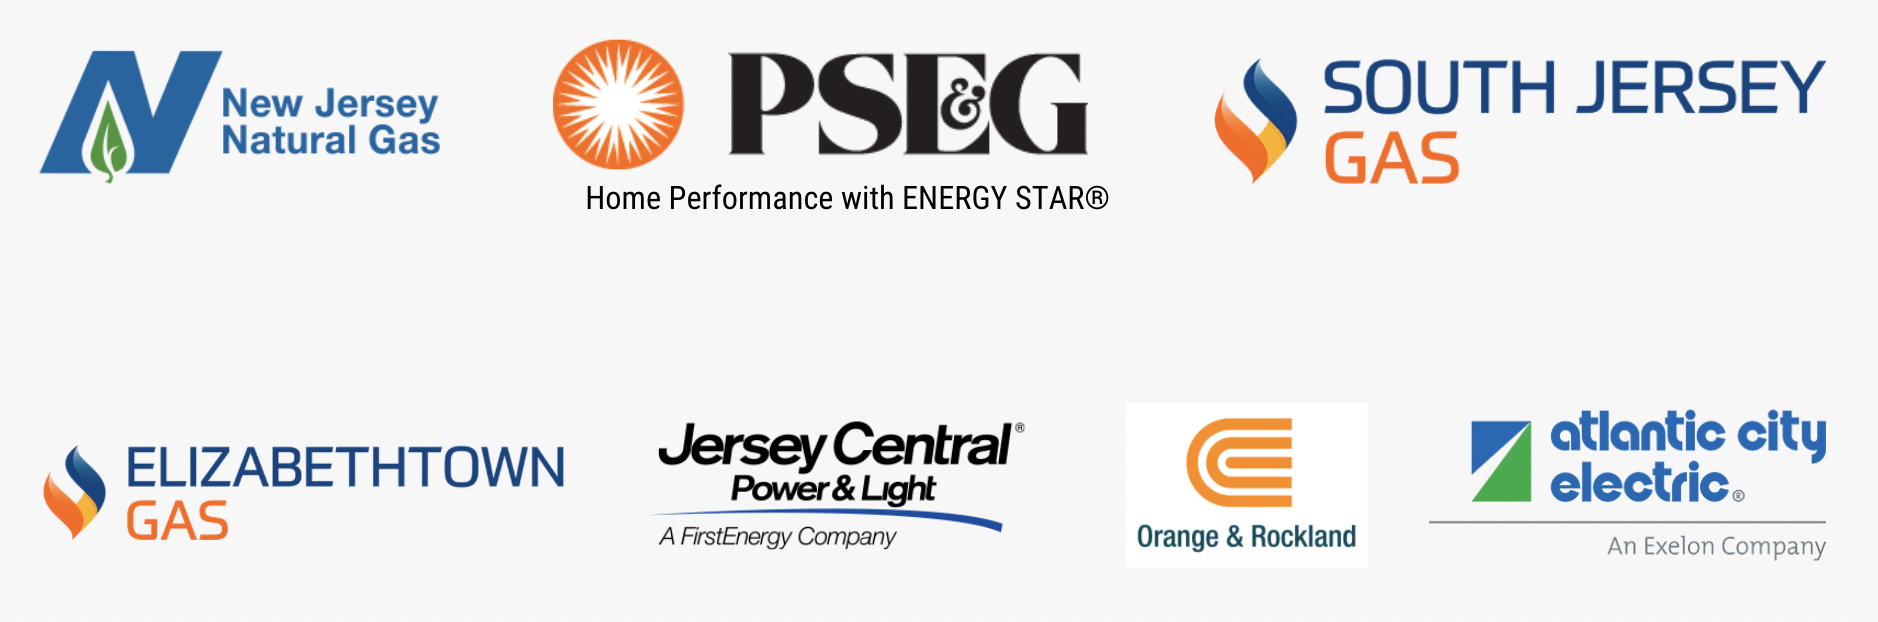 New Jersey Utilities Home Performance with Energy Star